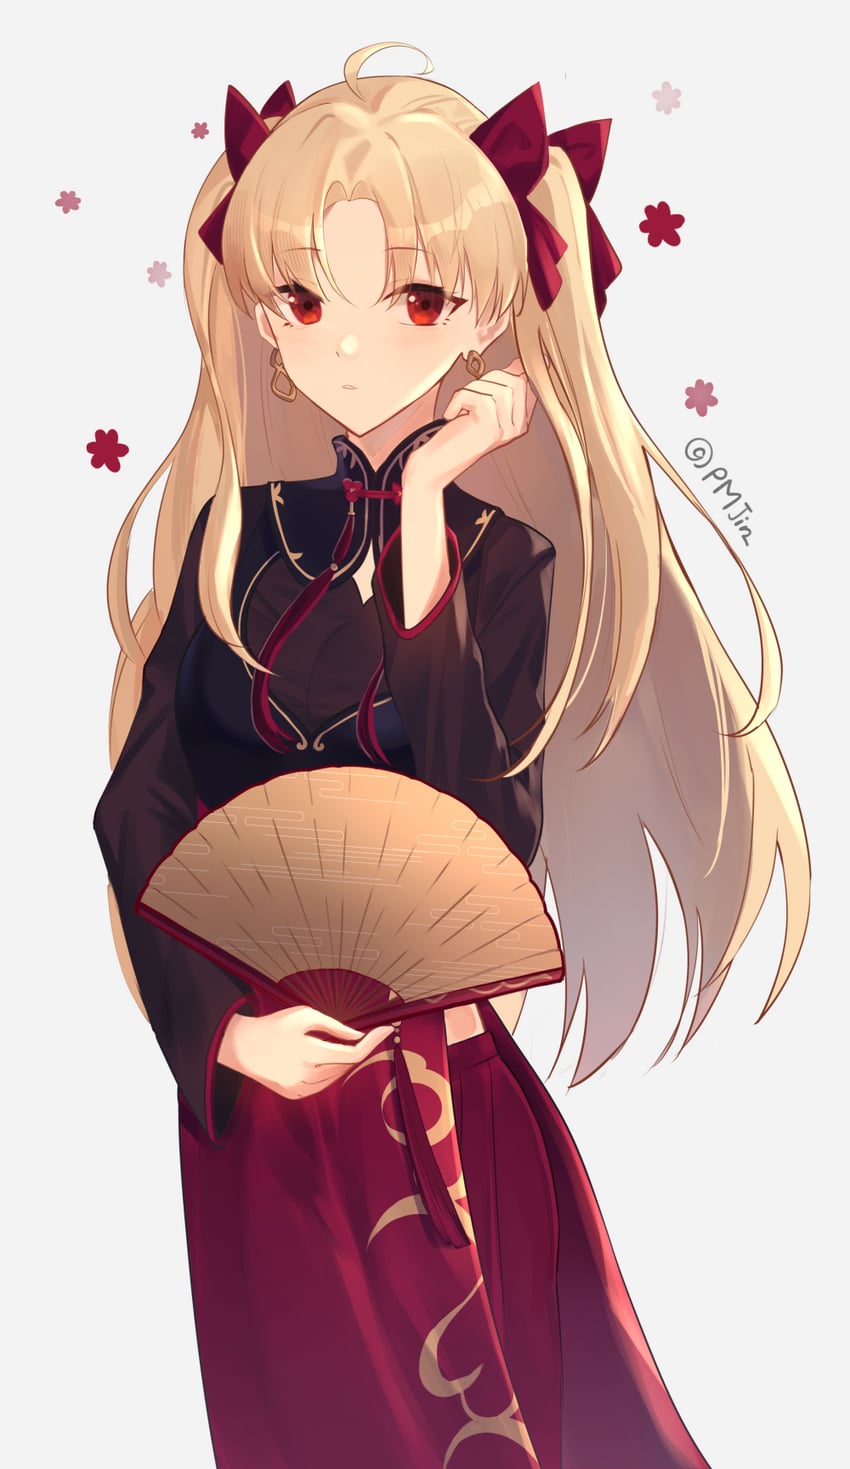 ereshkigal and ereshkigal (fate and 1 more) drawn by pappap